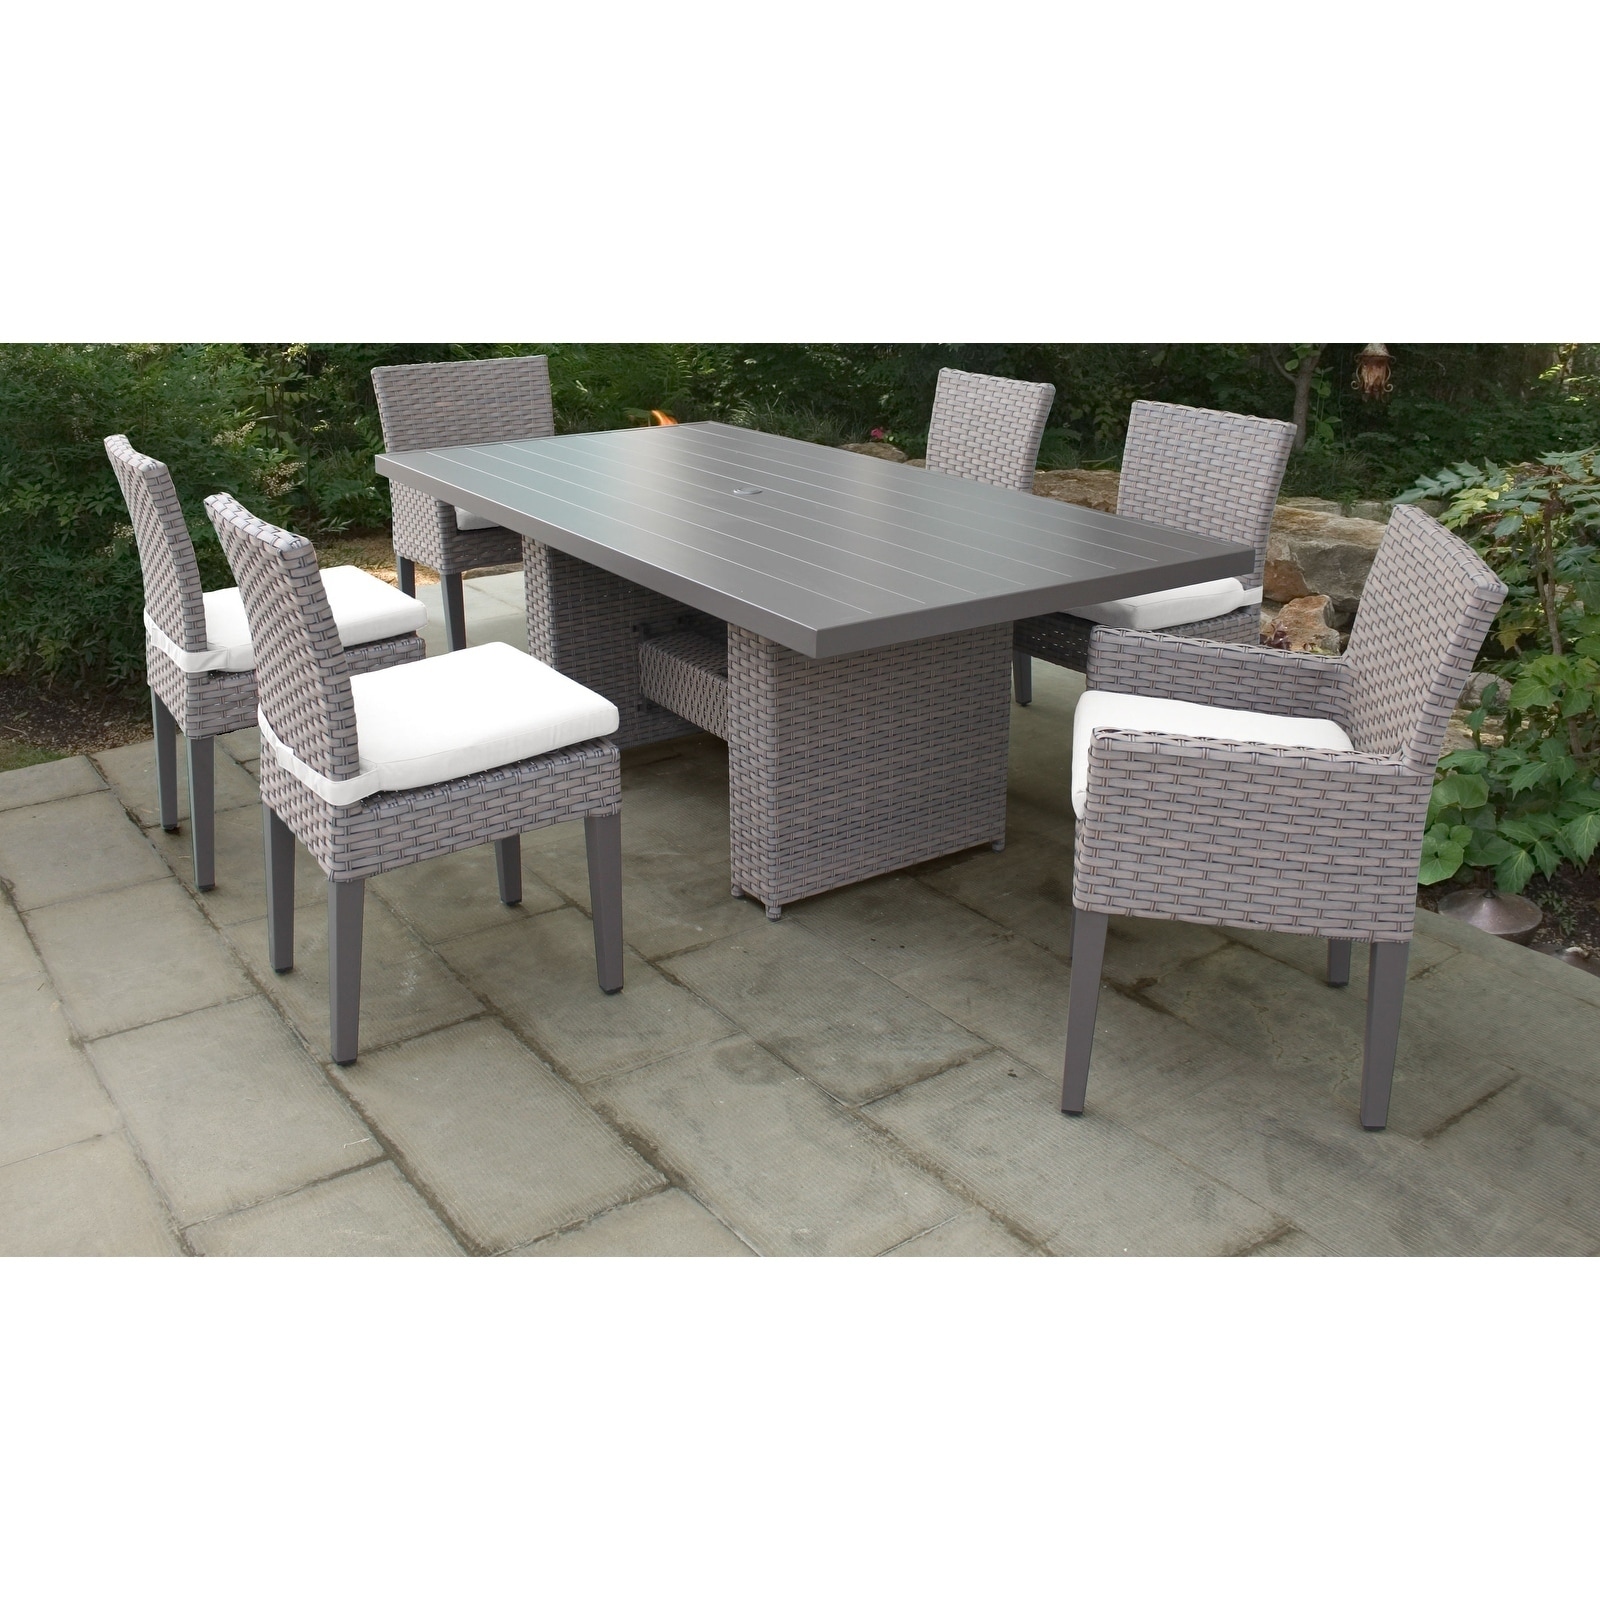 Monterey Rectangular Outdoor Patio Dining Table With 4 Armless Chairs And 2 Chairs W/ Arms